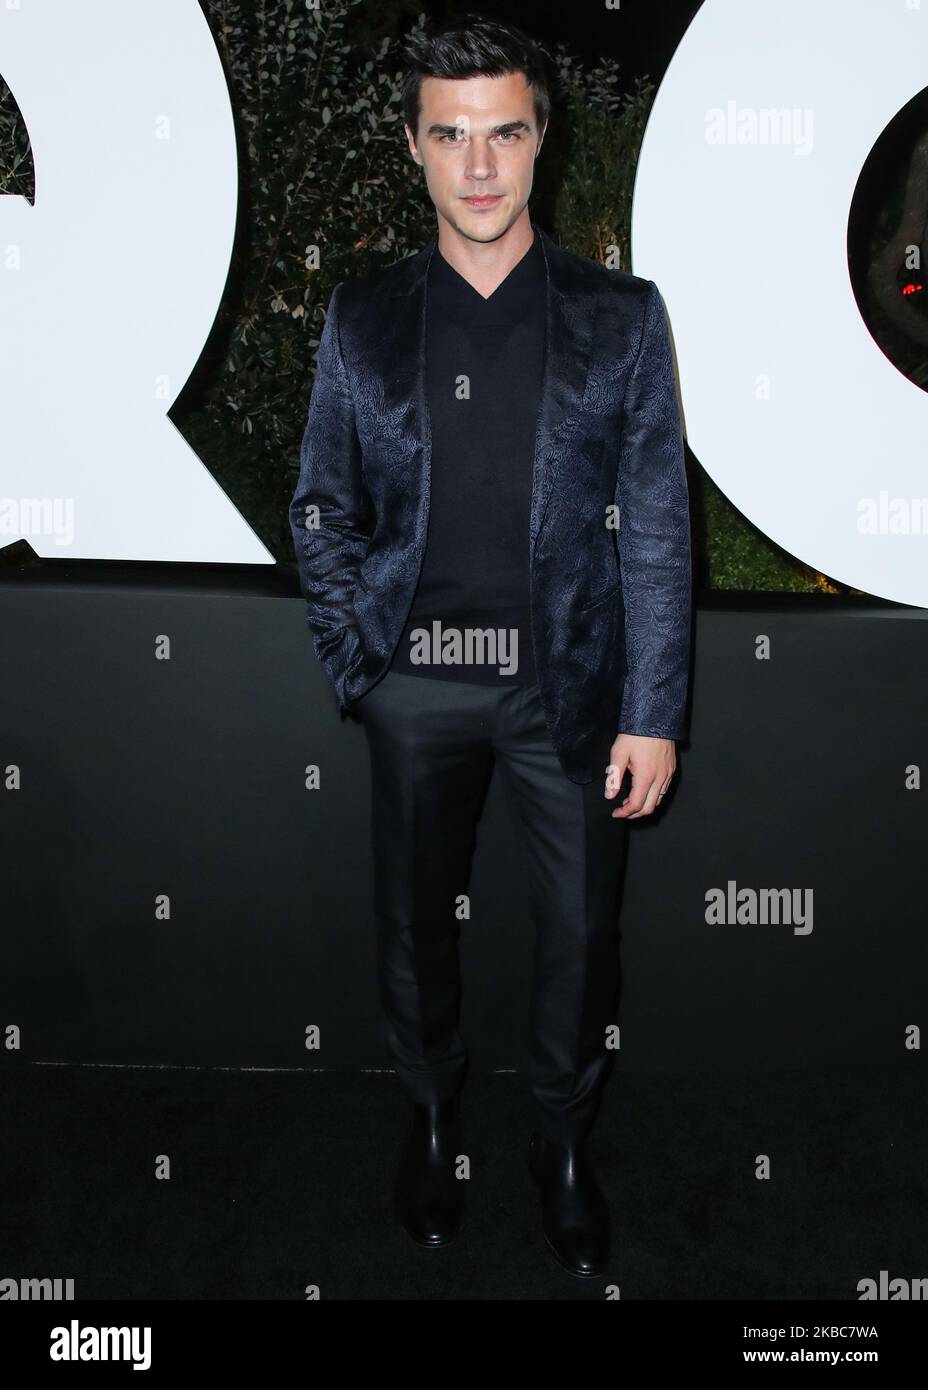 WEST HOLLYWOOD, LOS ANGELES, CALIFORNIA, USA - DECEMBER 05: Actor Finn Wittrock arrives at the 2019 GQ Men Of The Year Party held at The West Hollywood EDITION Hotel on December 5, 2019 in West Hollywood, Los Angeles, California, United States. (Photo by Xavier Collin/Image Press Agency/NurPhoto) Stock Photo